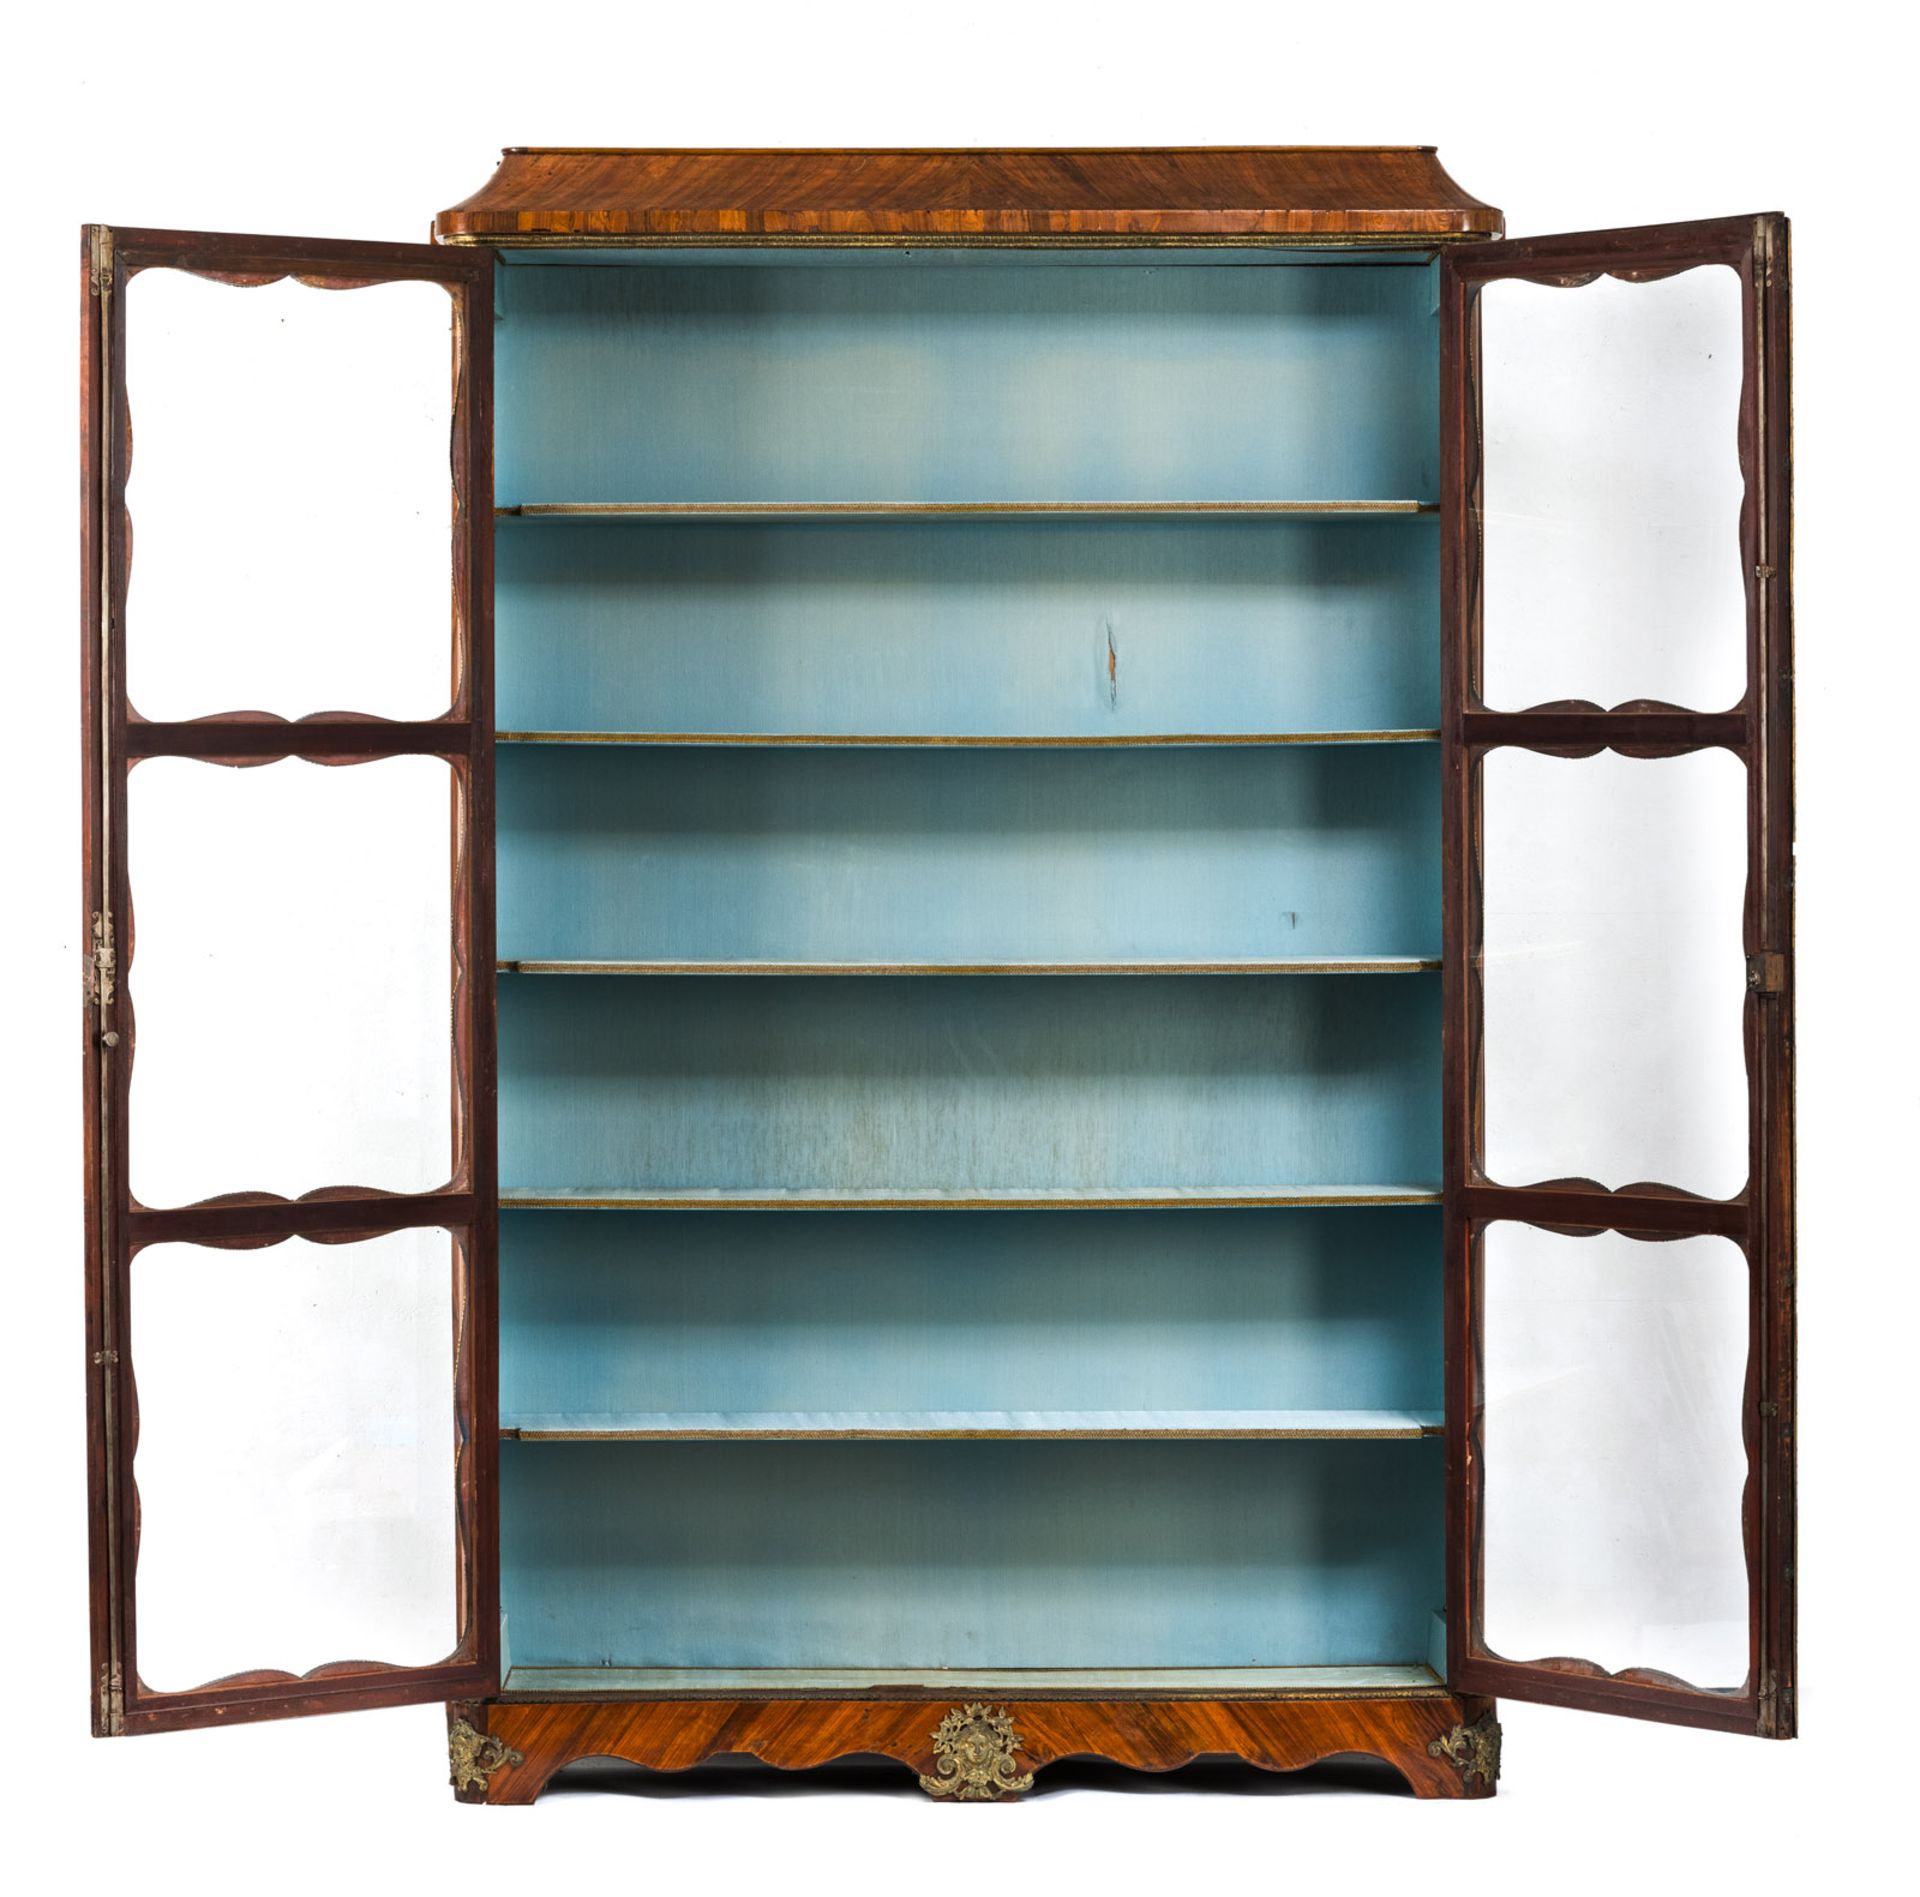 A FRENCH REGENCE STYLE ORMOLU-MOUNTED KINGWOOD BIBLIOTHEQUE - Image 2 of 3